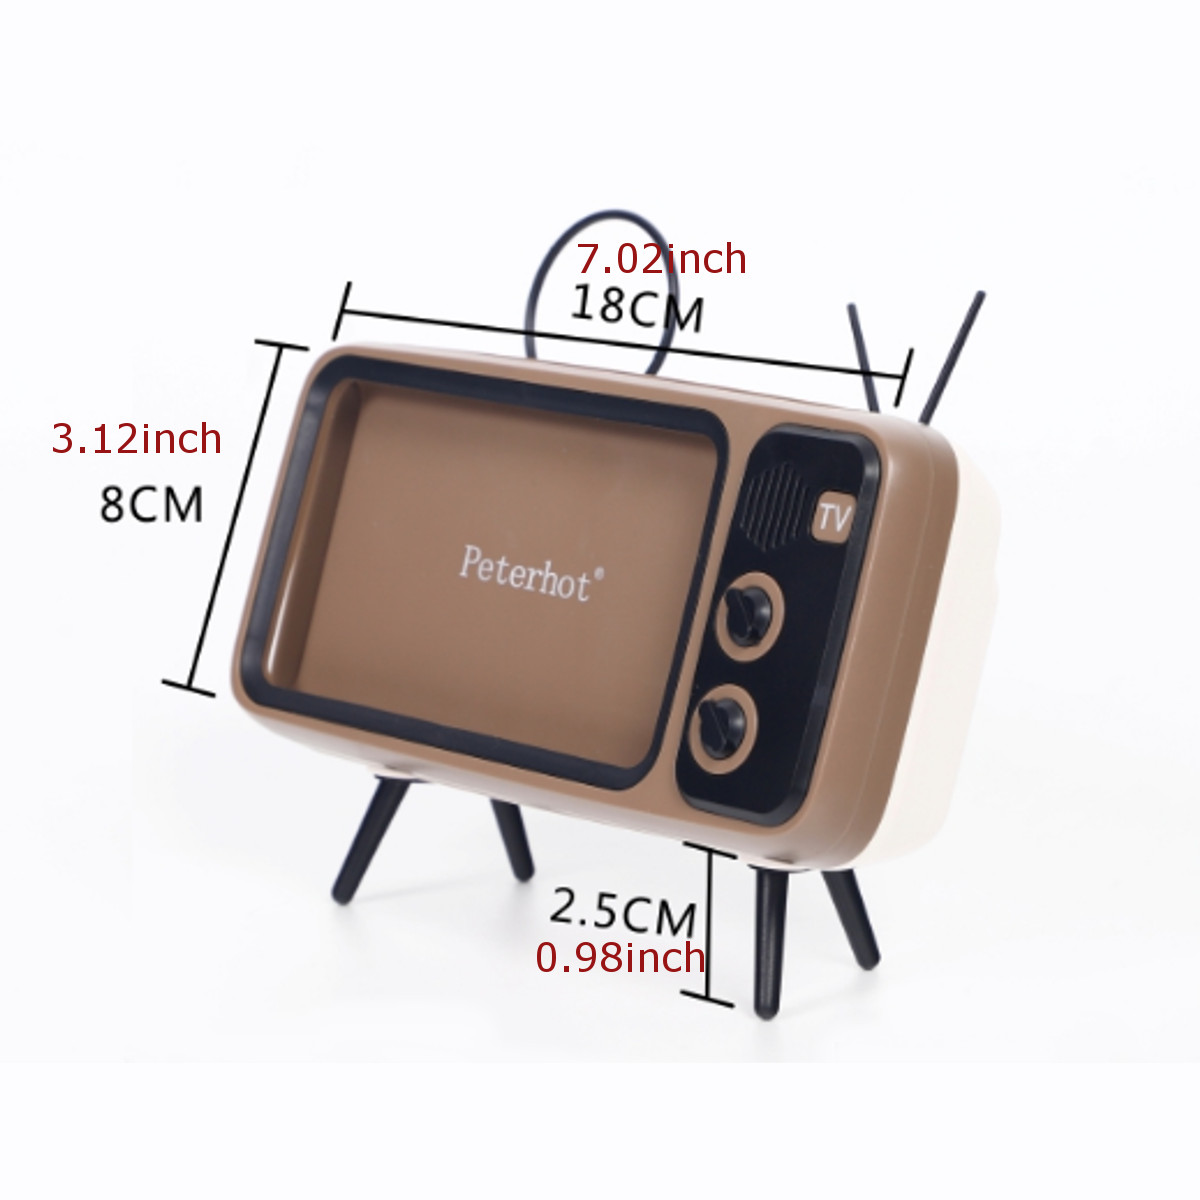 Bakeey-Mini-Retro-TV-Pattern-Desktop-Cell-Phone-Stand-Holder-Lazy-Bracket-Compatible-with-Mobile-Pho-1579325-8